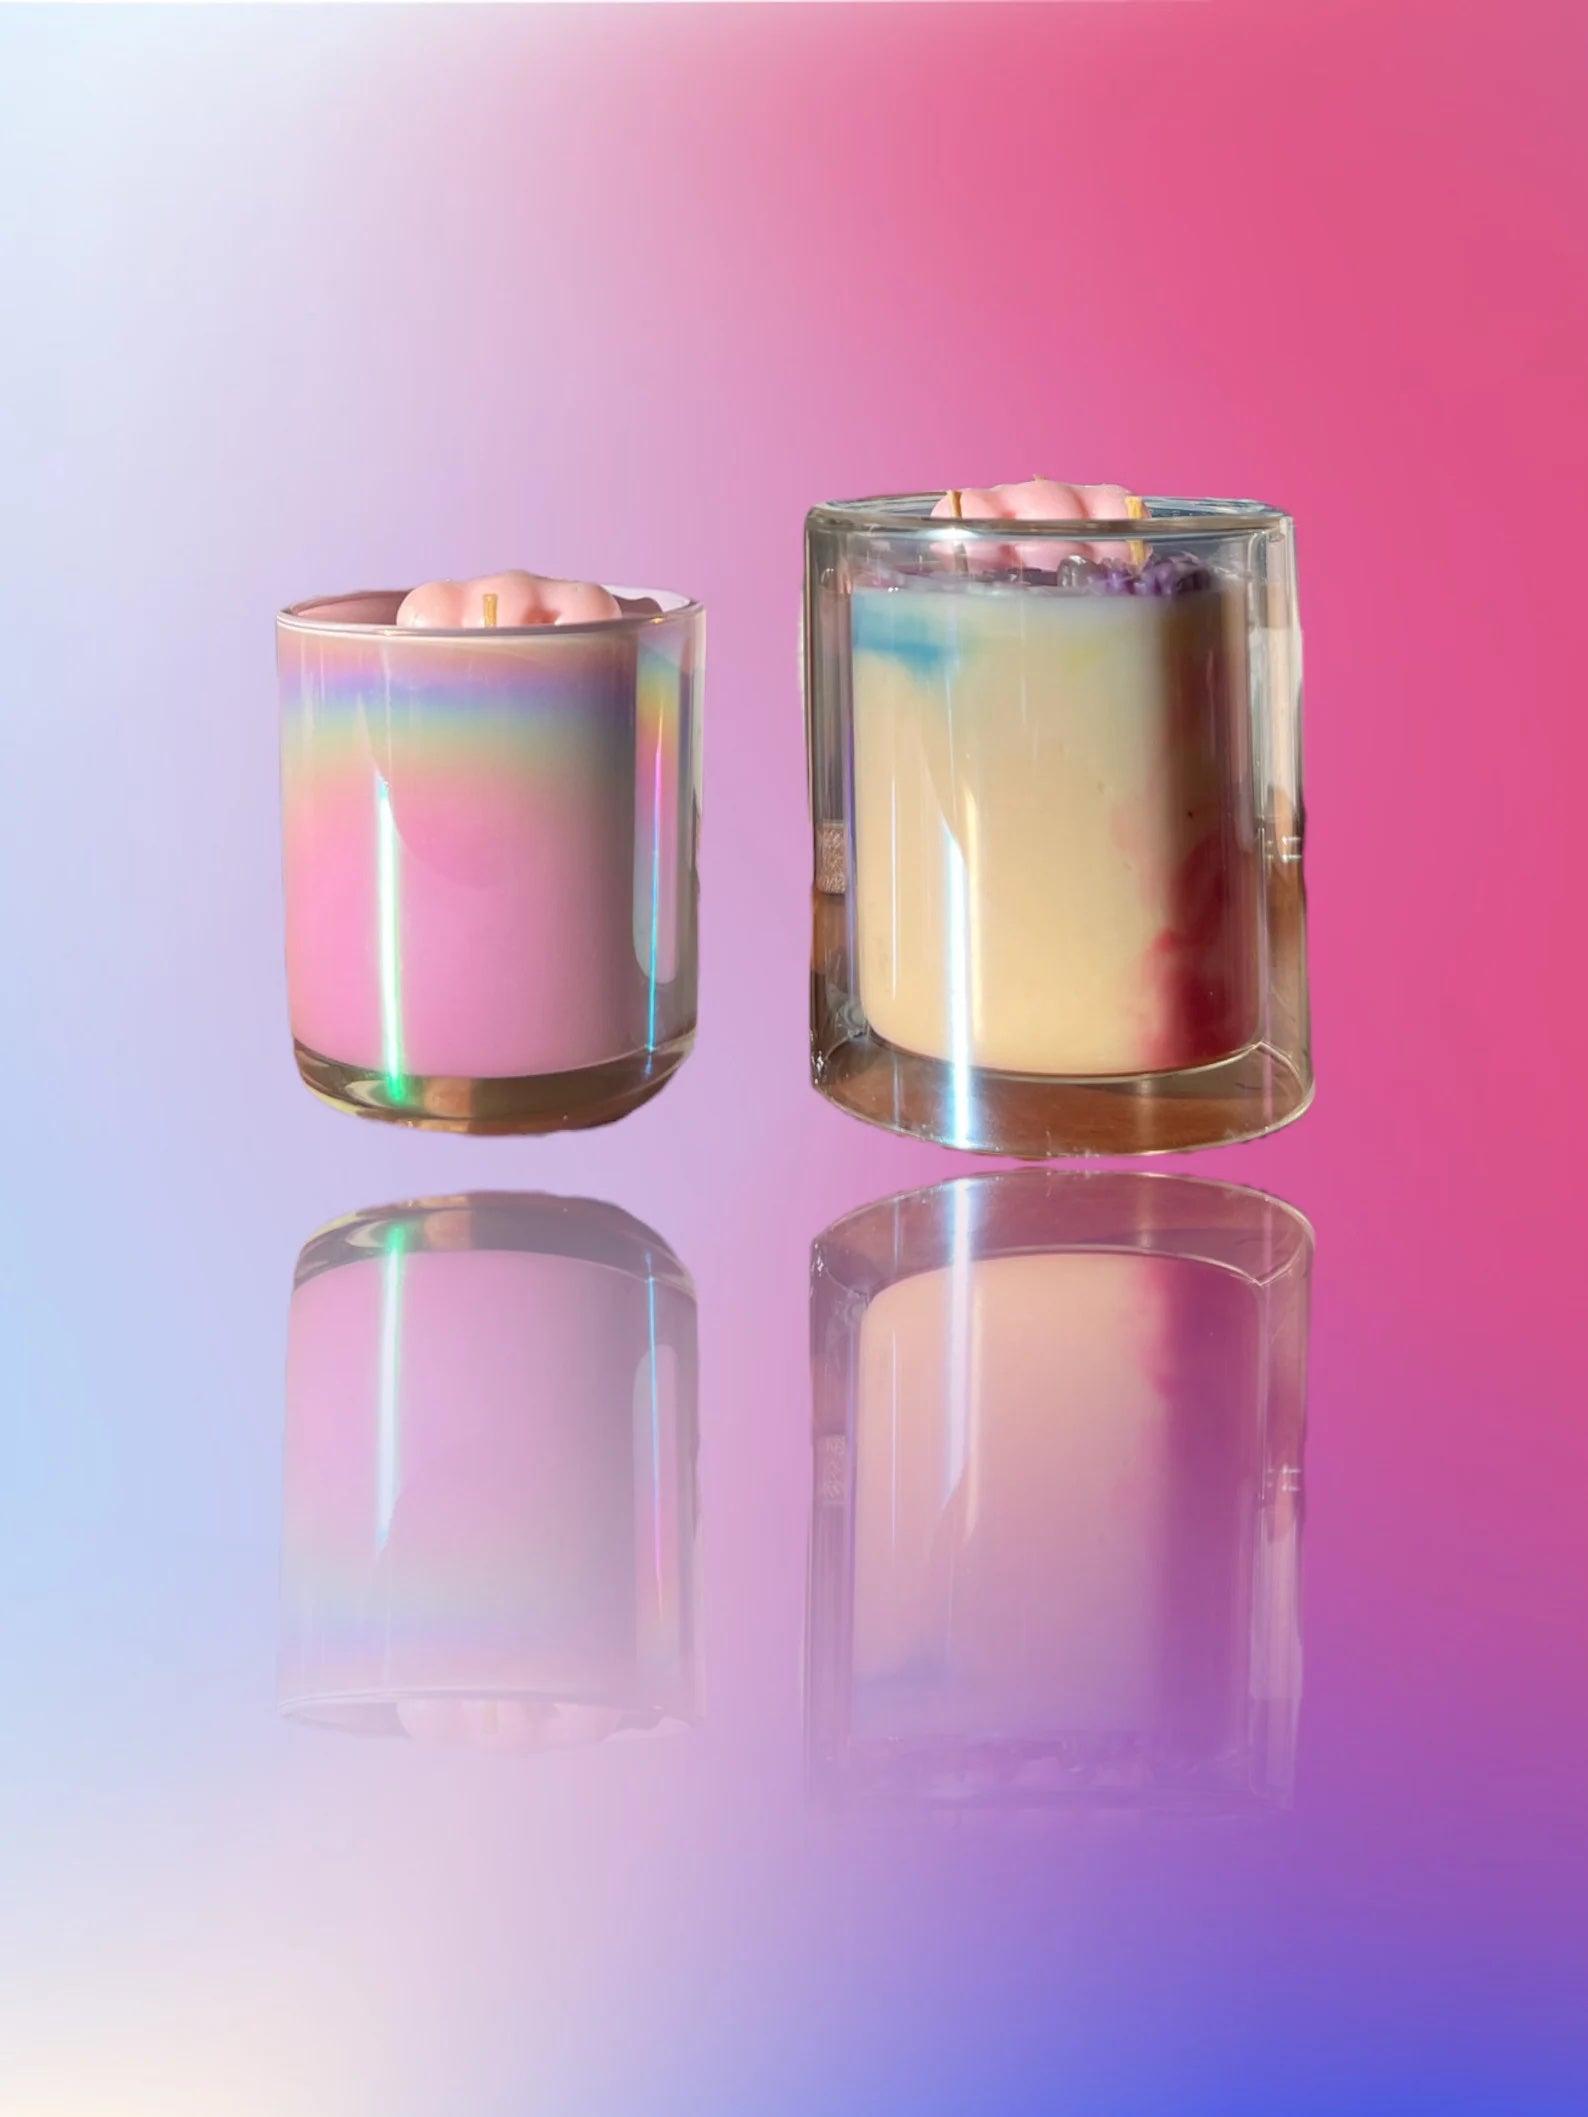 Psychedelic Tarot Inspired Candles